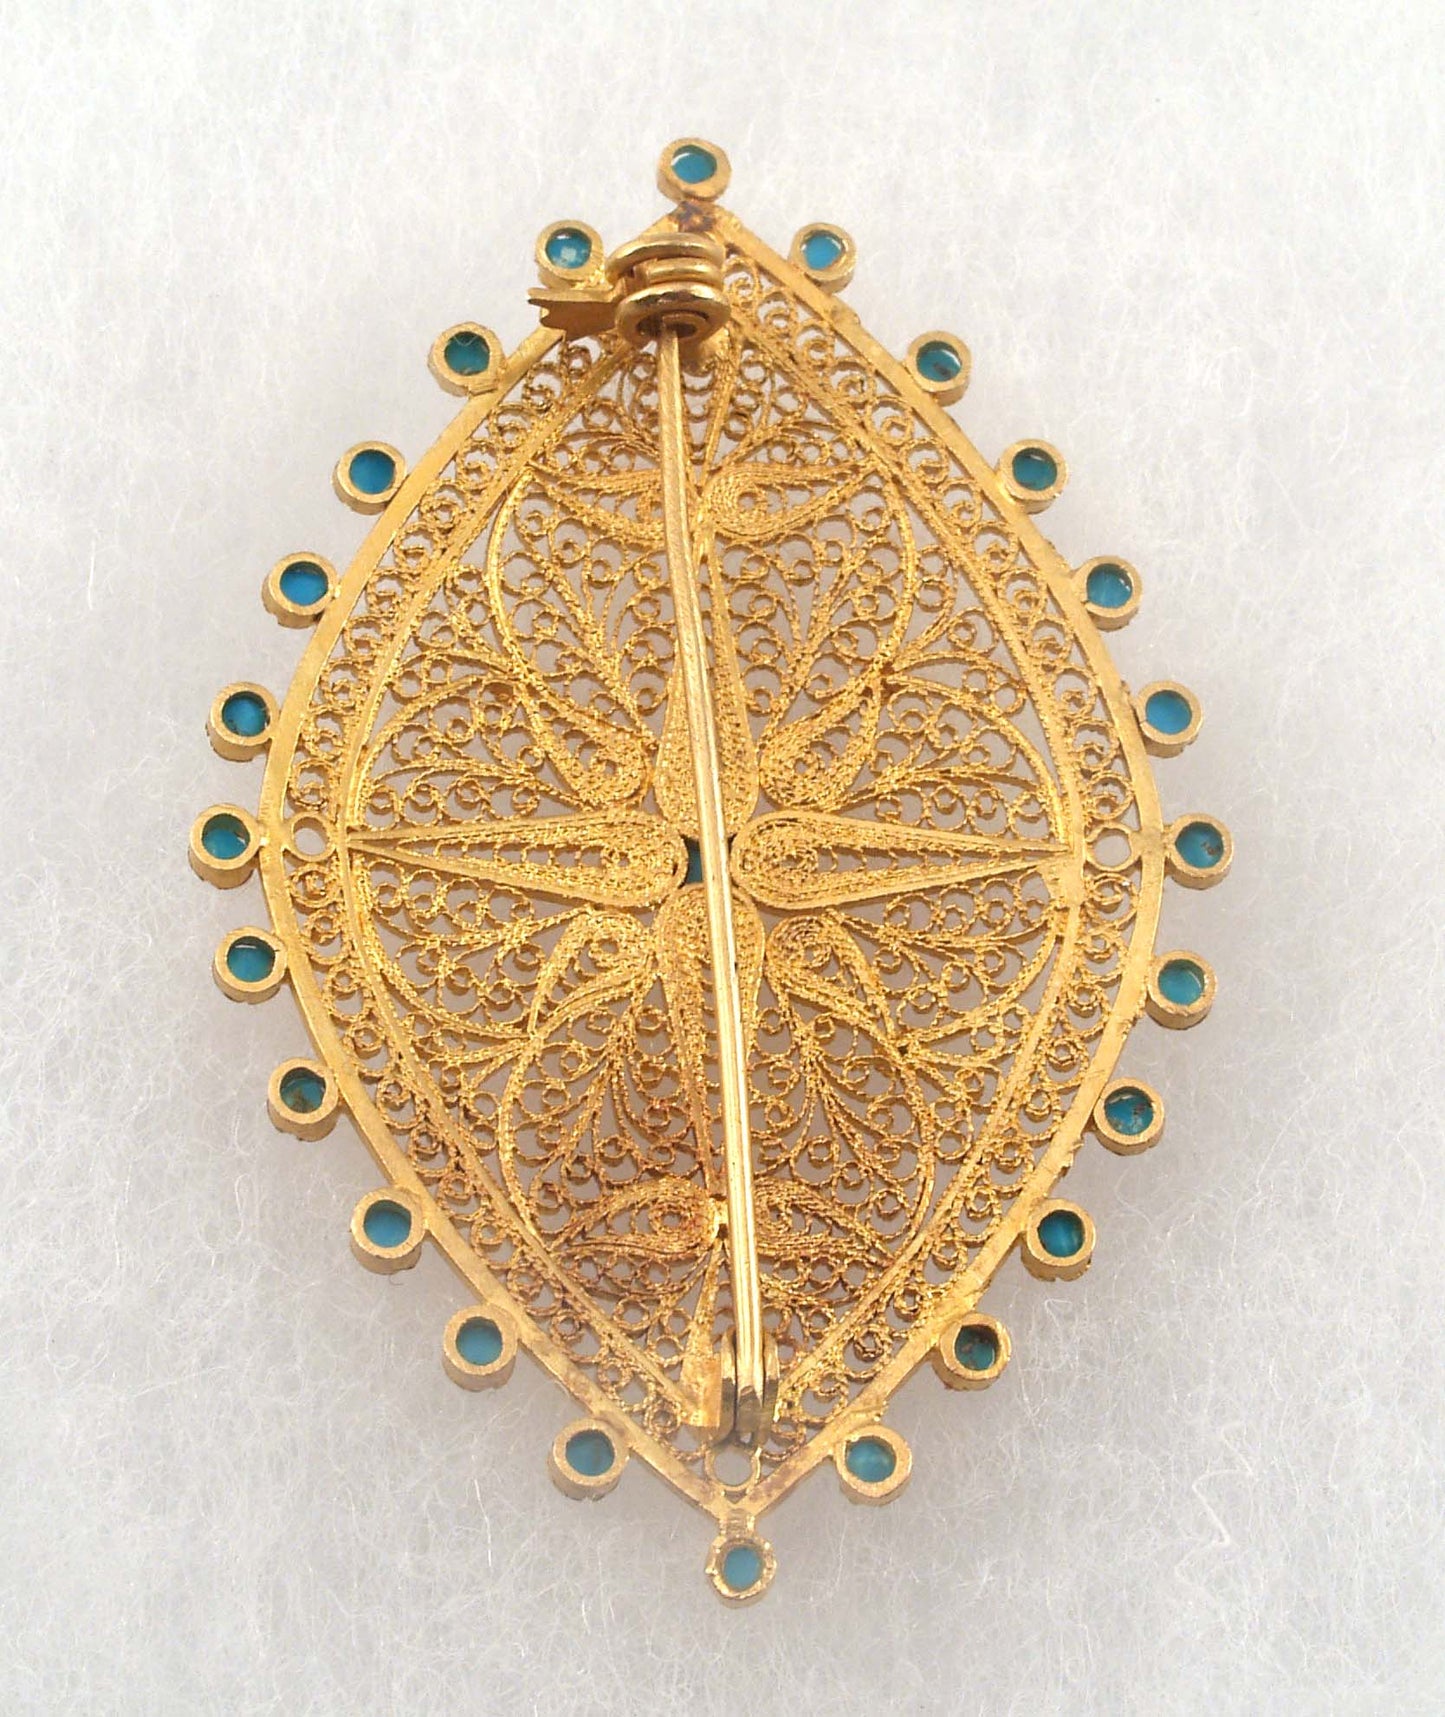 HE-Brooch, 'Shah' style pin in high karat gold filigree with Persian turquoise